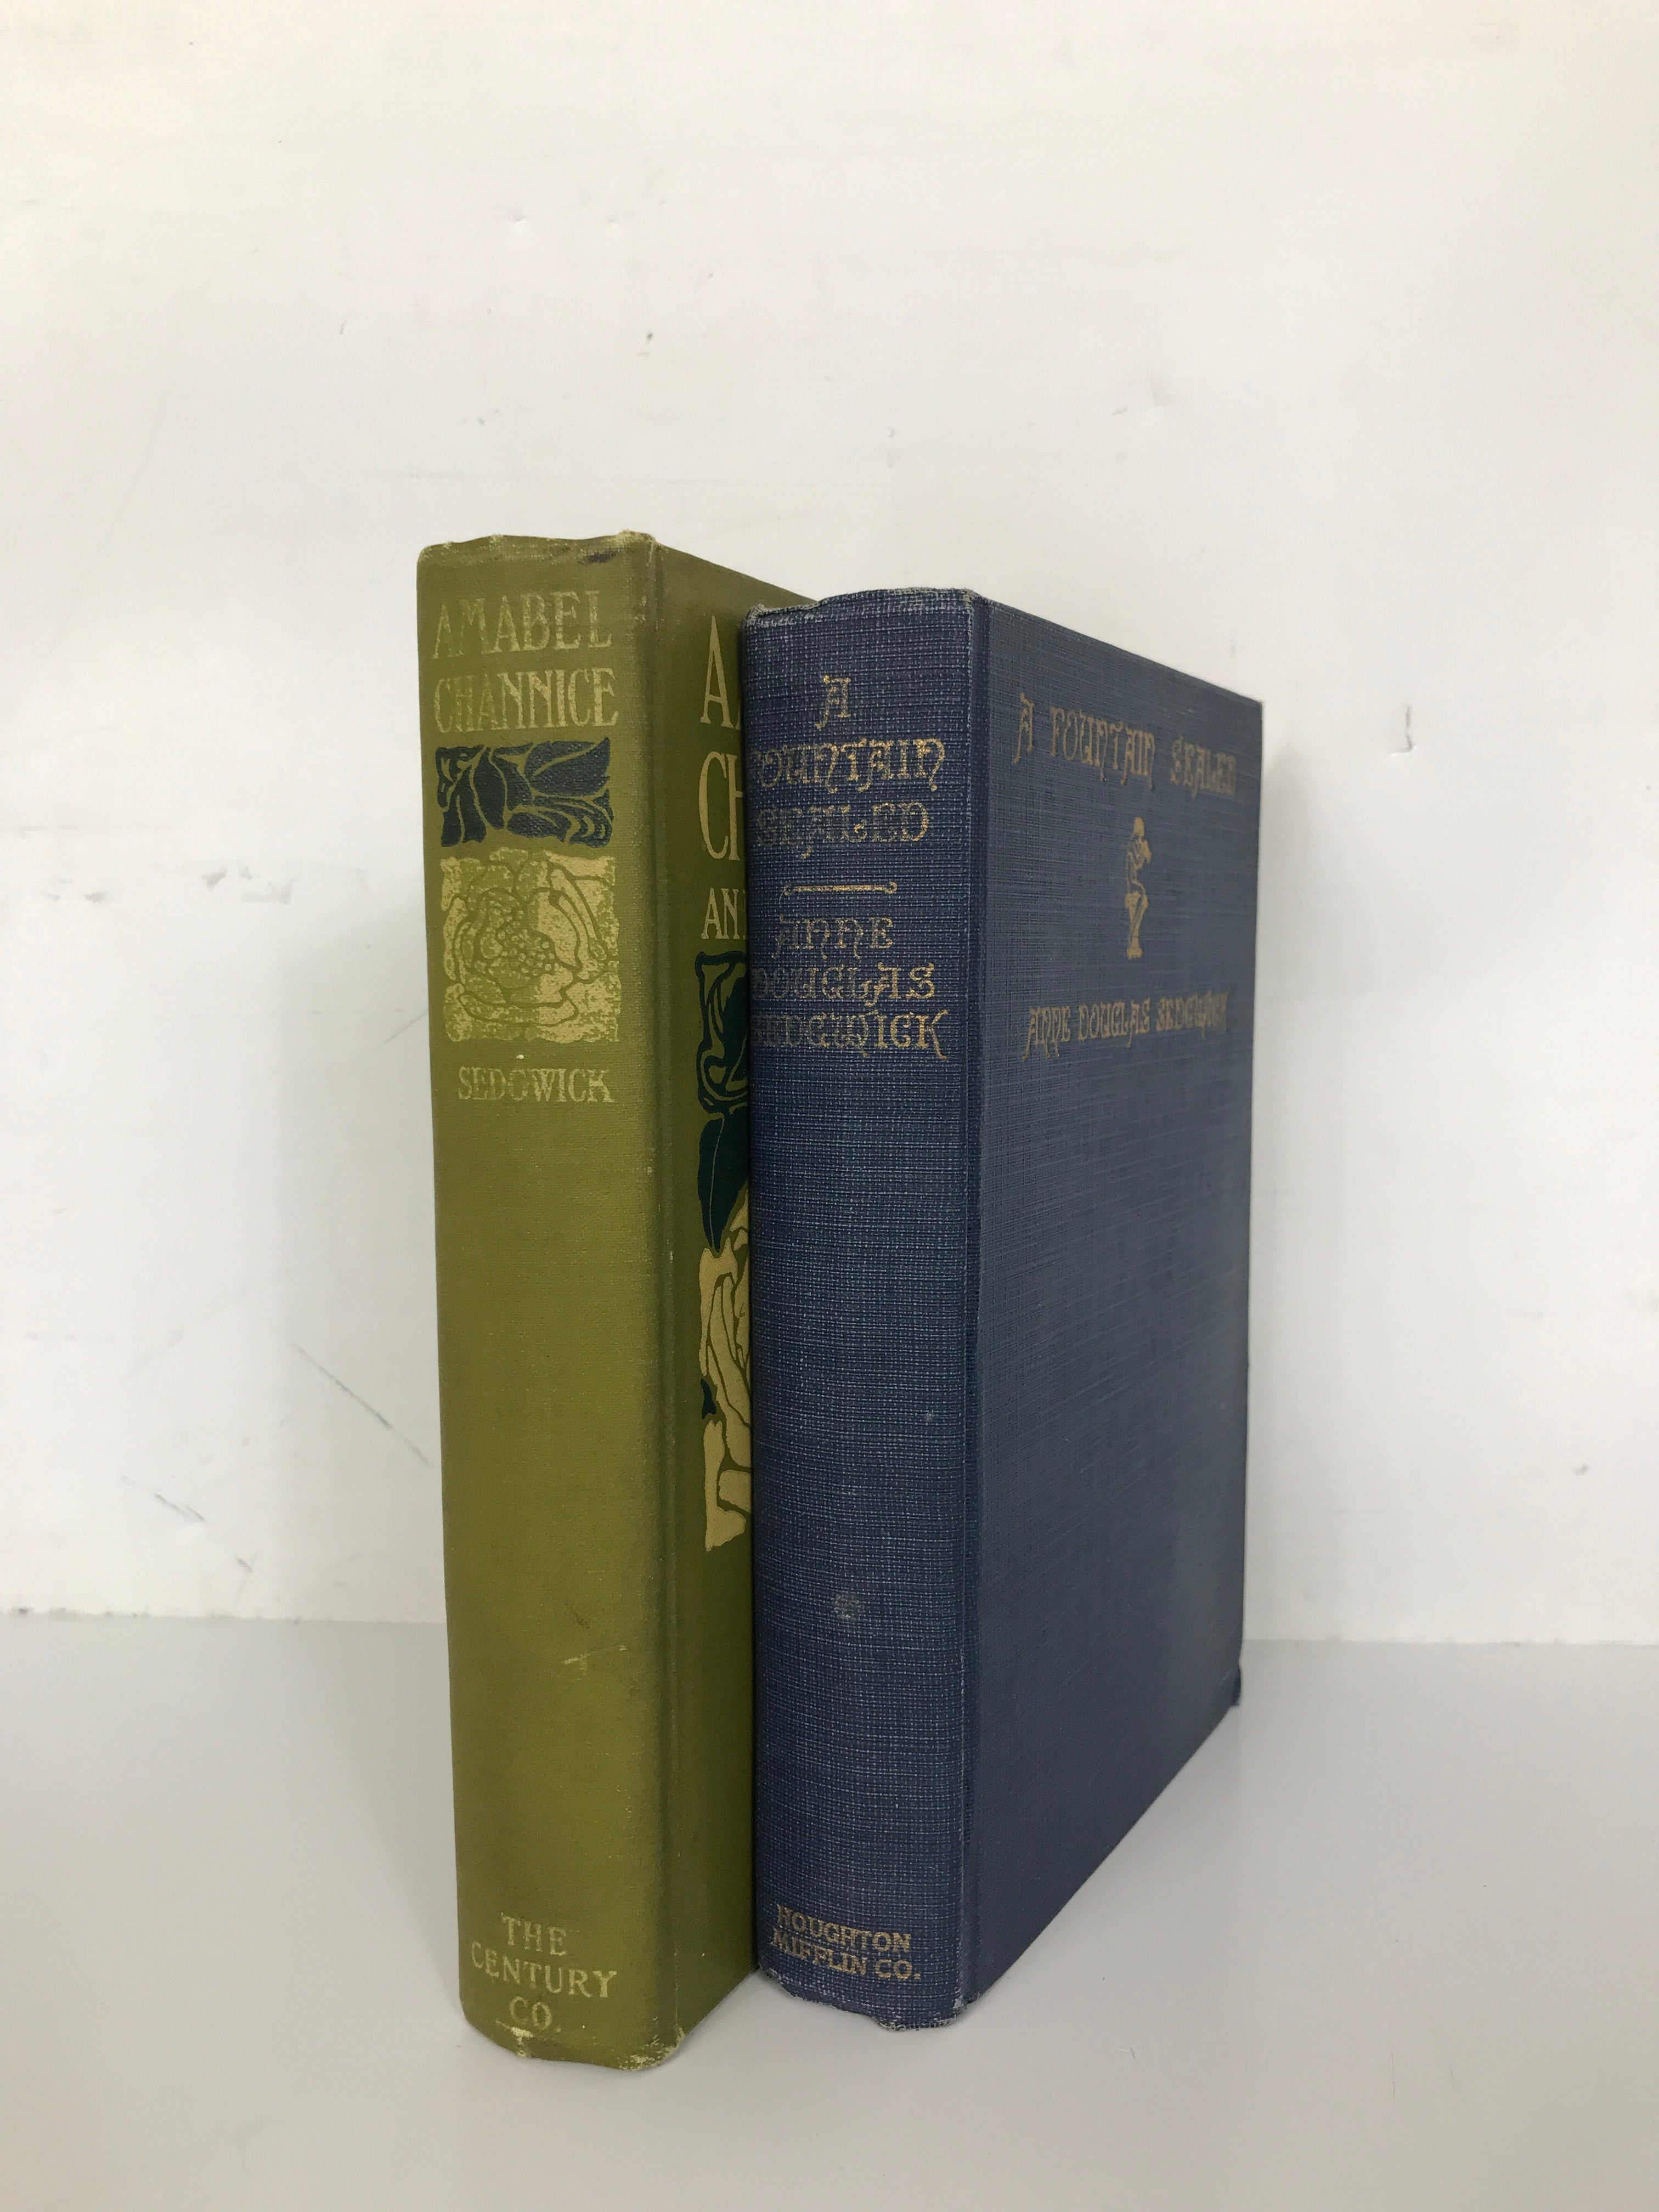 Lot of 2 Anne Douglas Sedgwick First Editions:1907-1908 HC